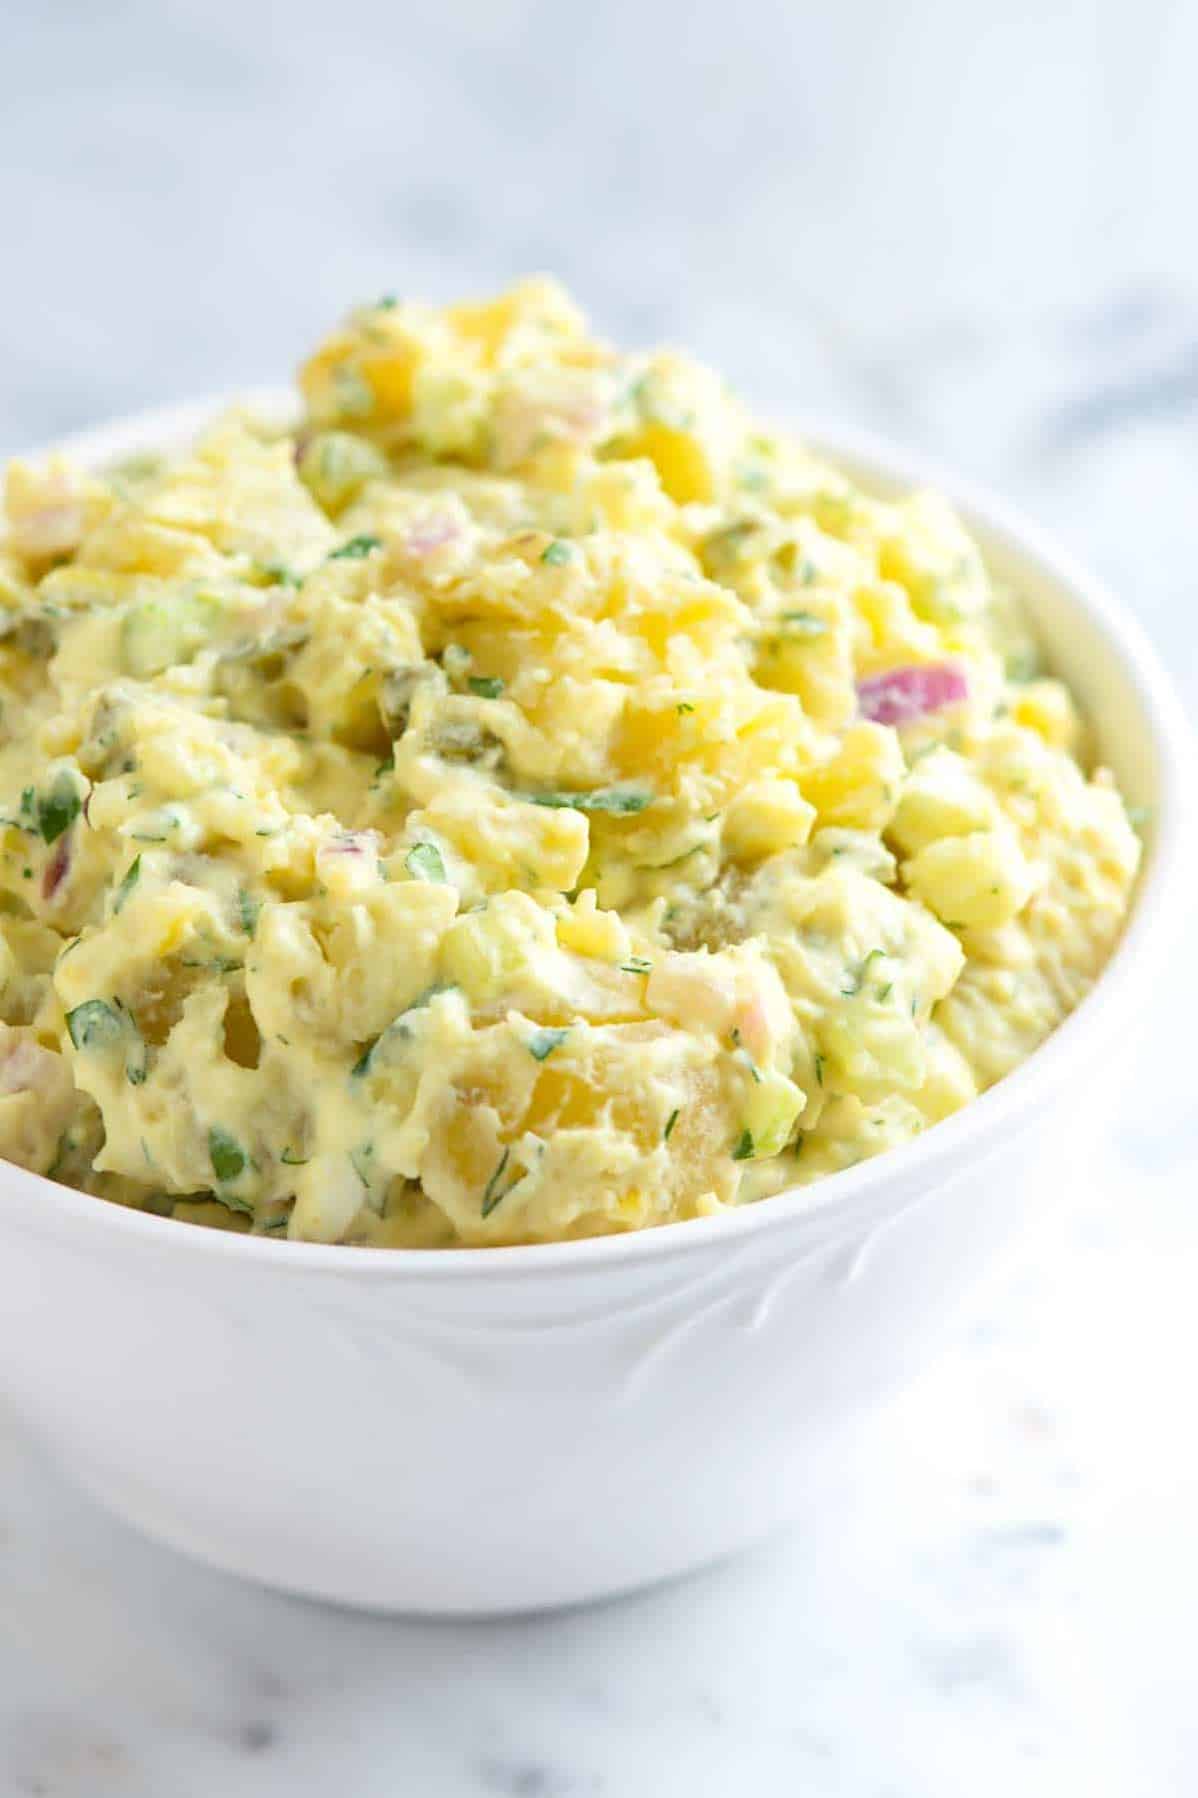  Can't spell summer without potato salad.